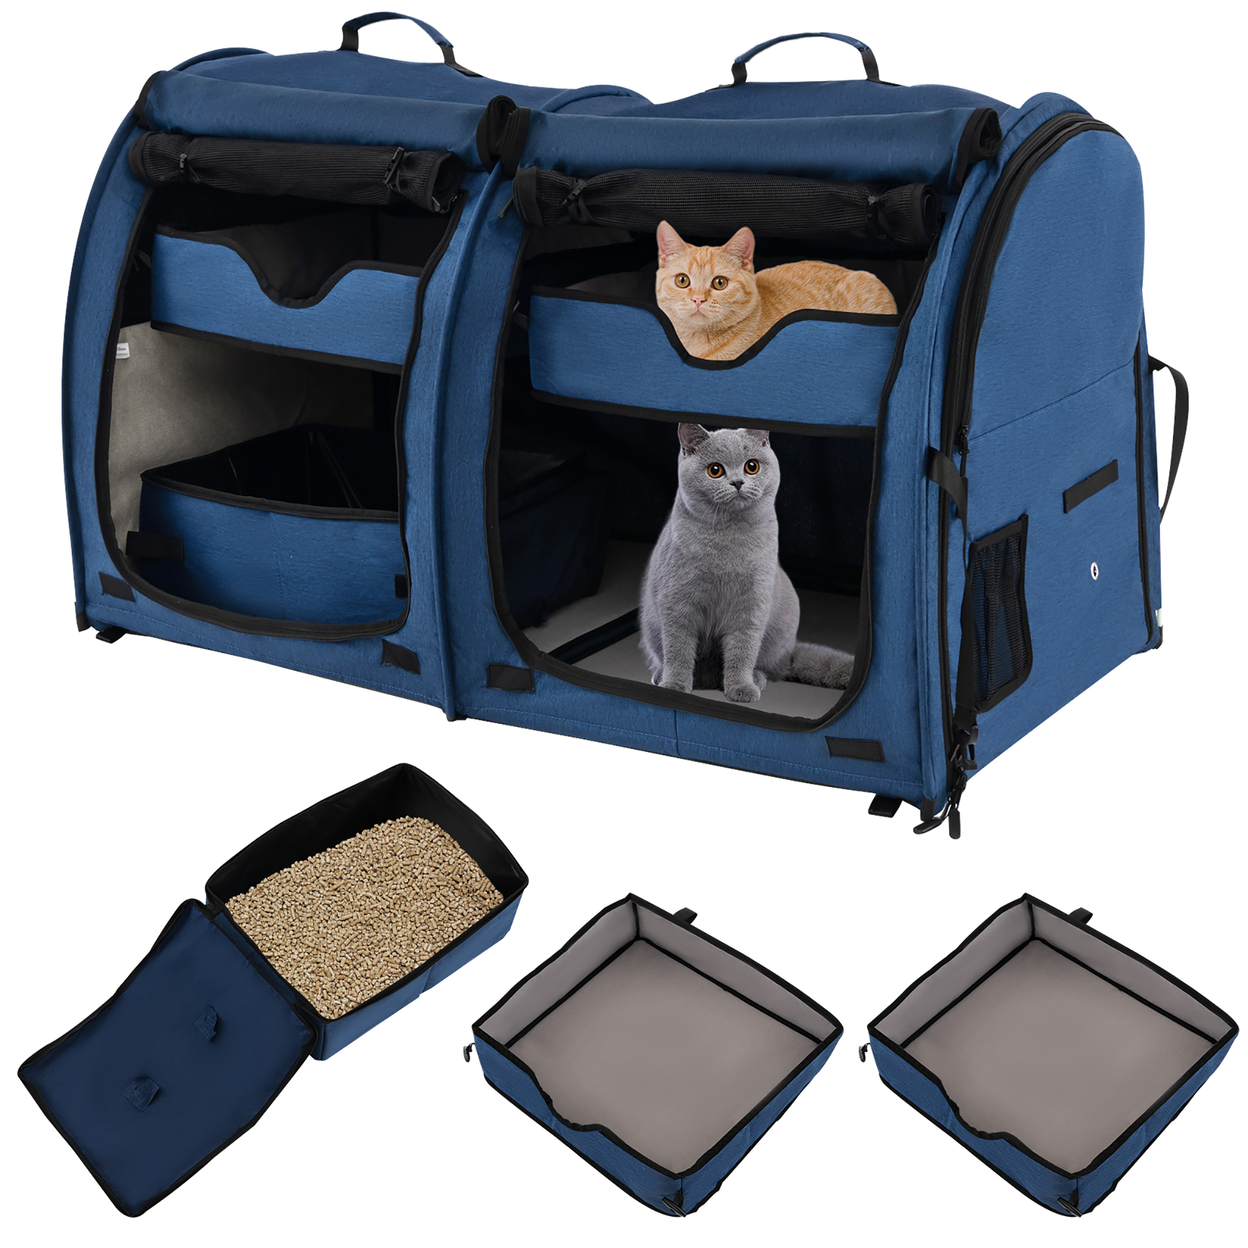 Portable Pet Carrier Kennel Cat Dog Crate Twin Compartments W/ Mats Litter Box Navy Blue